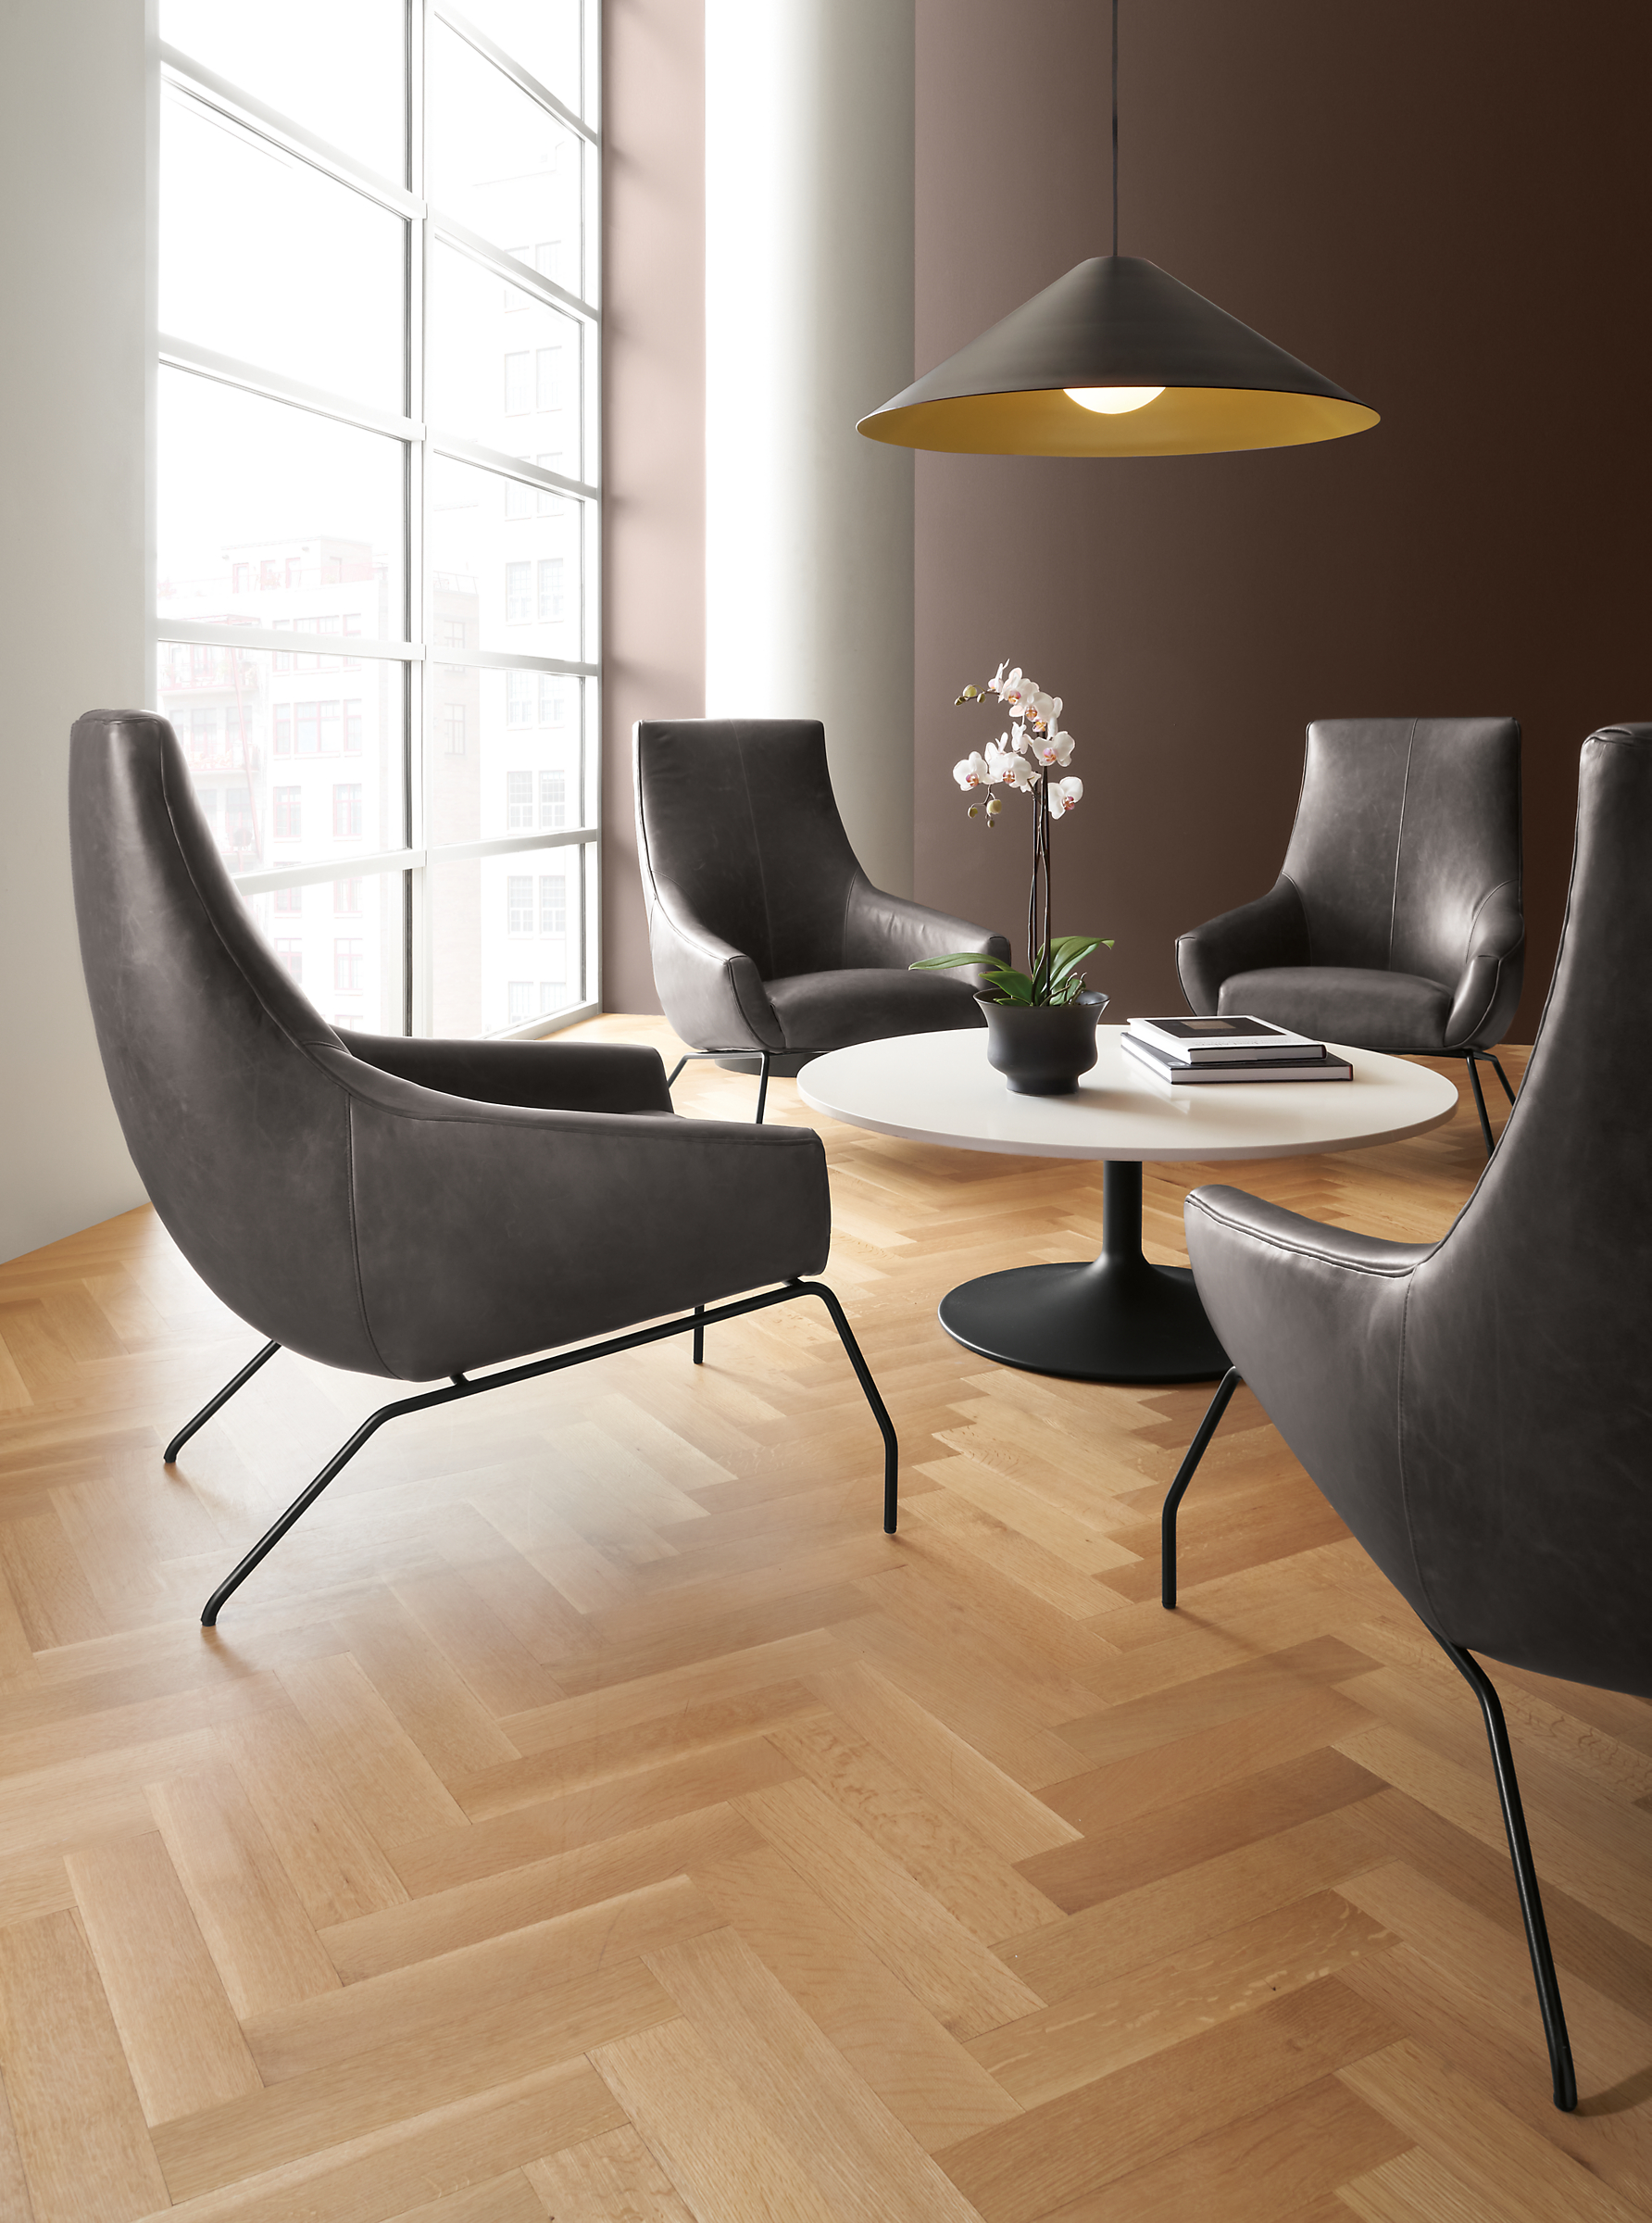 Rhodes leather chairs in Vento smoke with aria coffee table in graphite base with White top.